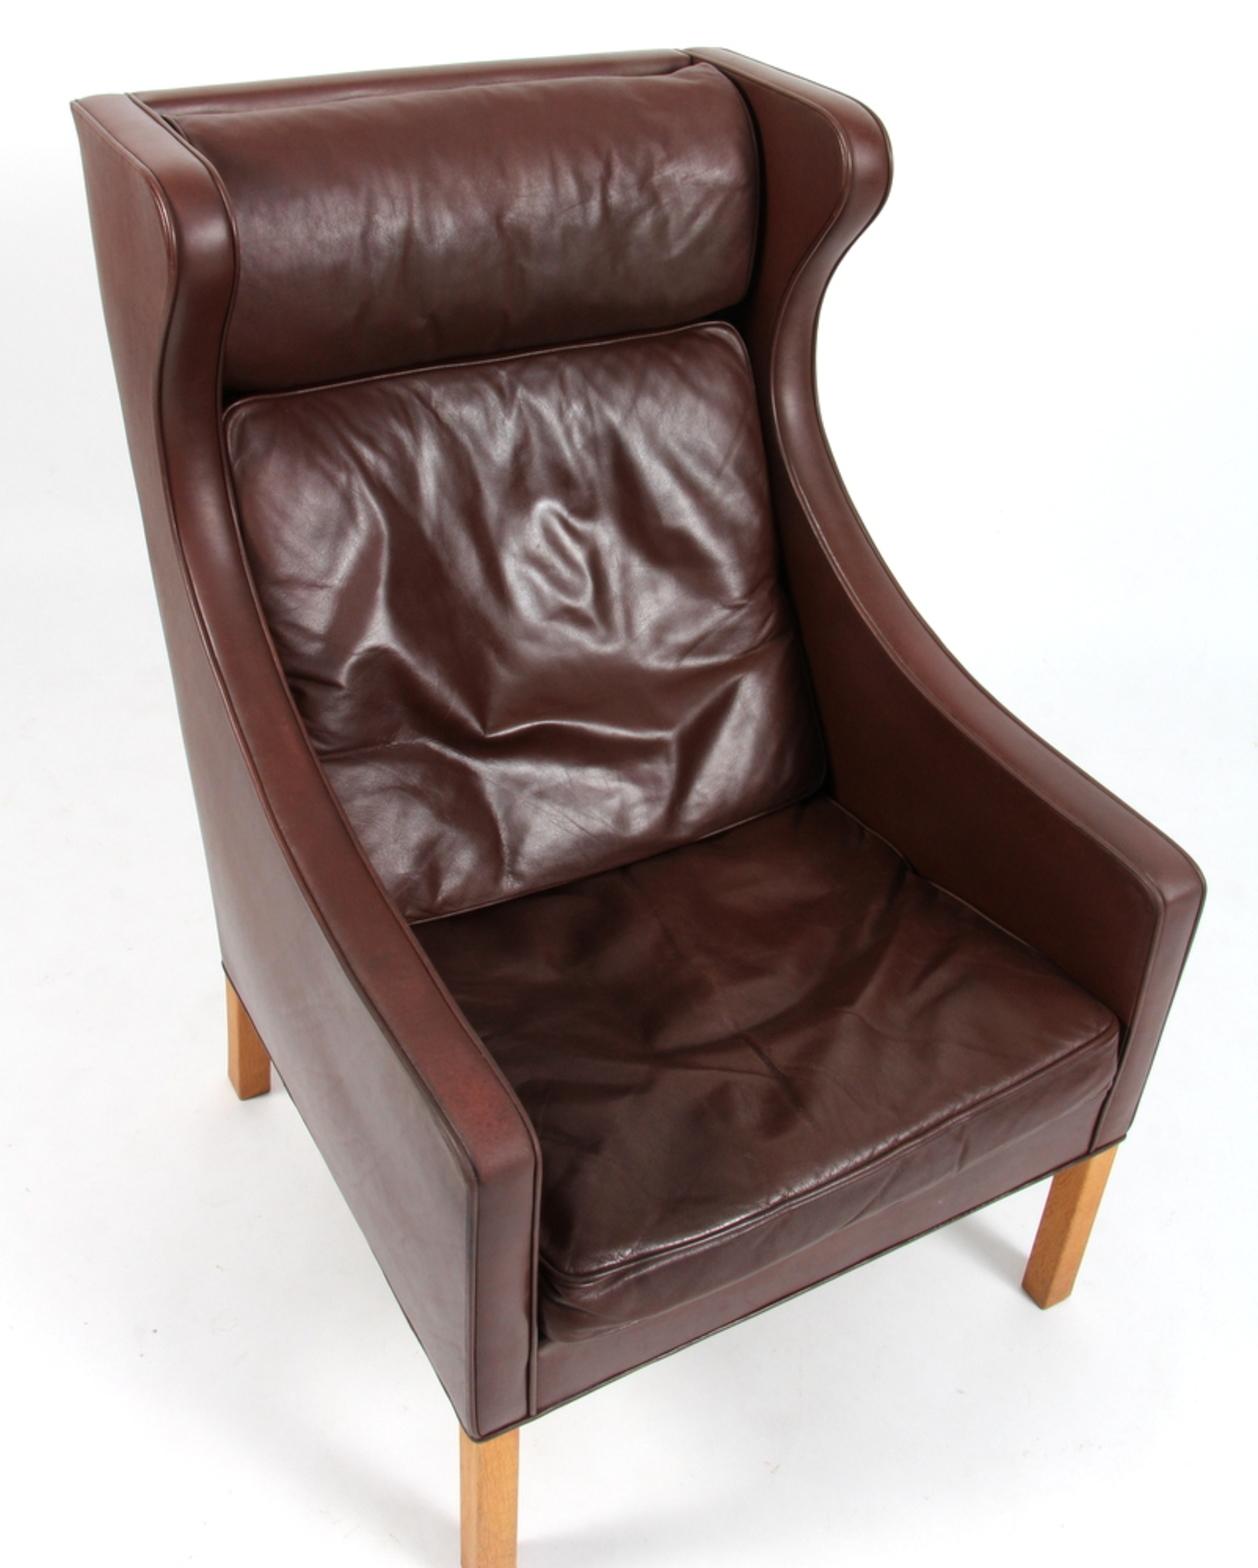 Børge Mogensen wing back chair in original brown patinated leather upholstery.

Legs in oak.

Model 2204, made by Fredericia Furniture.

 